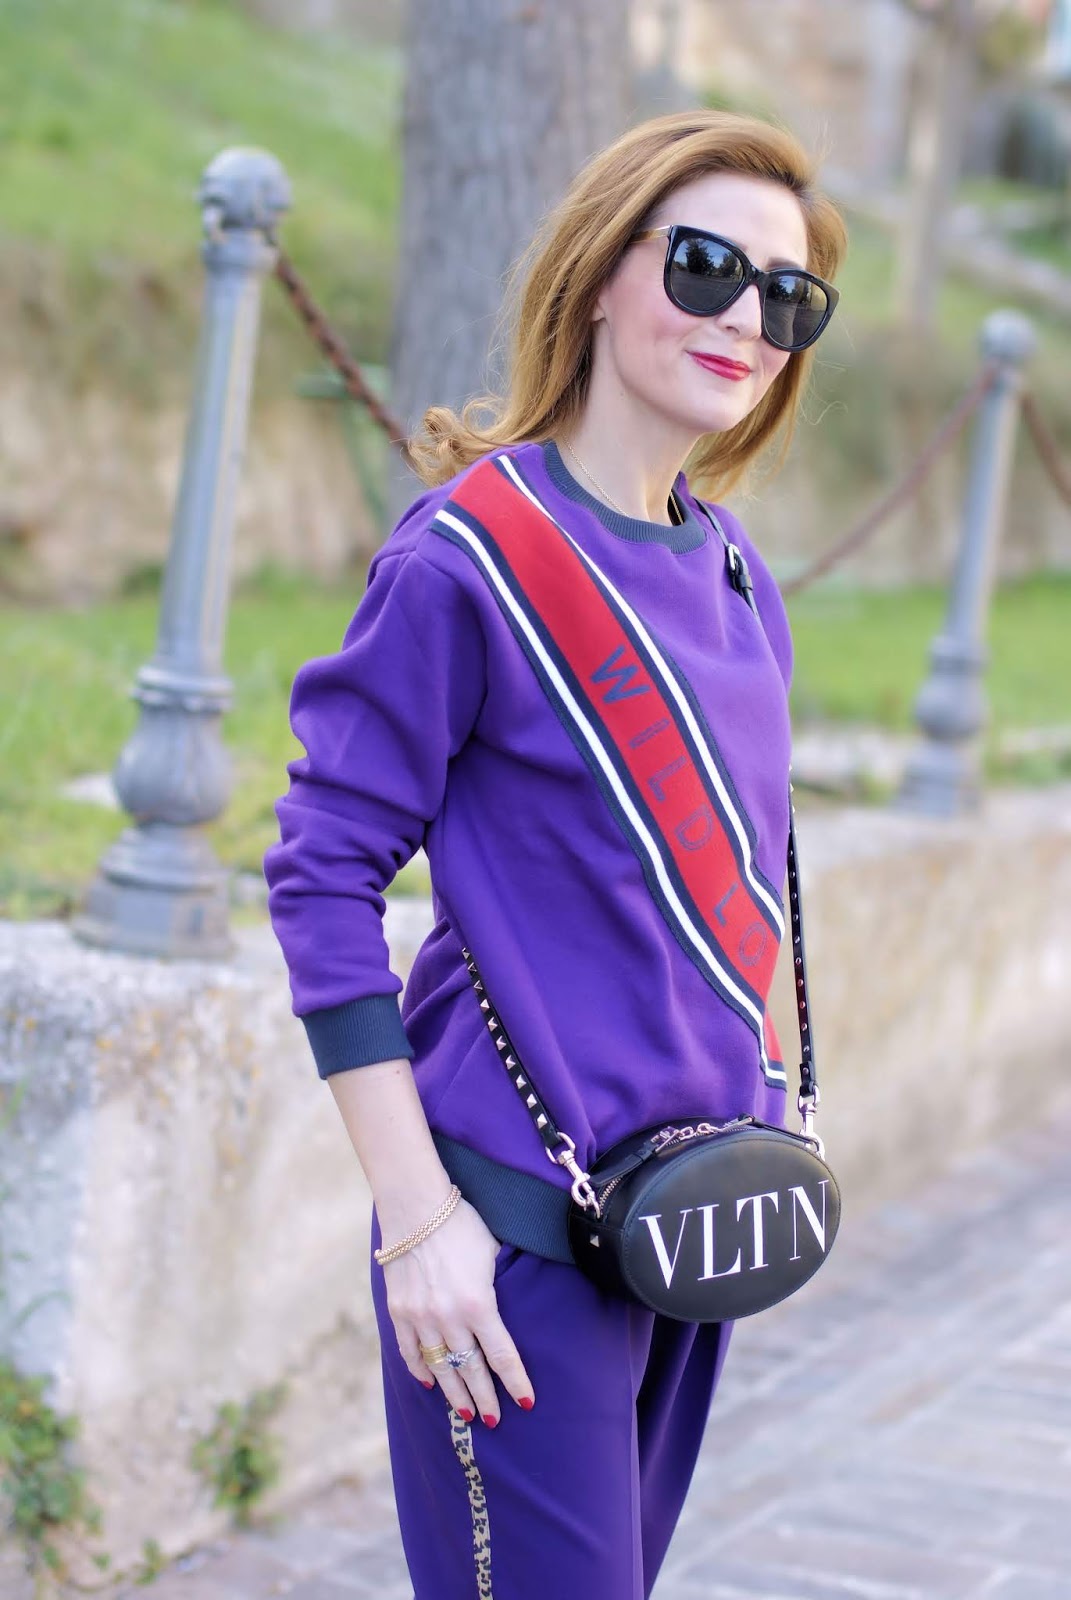 VLTN: the new Valentino logo in a sporty chic outfit on Fashion and Cookies fashion blog, fashion blogger style